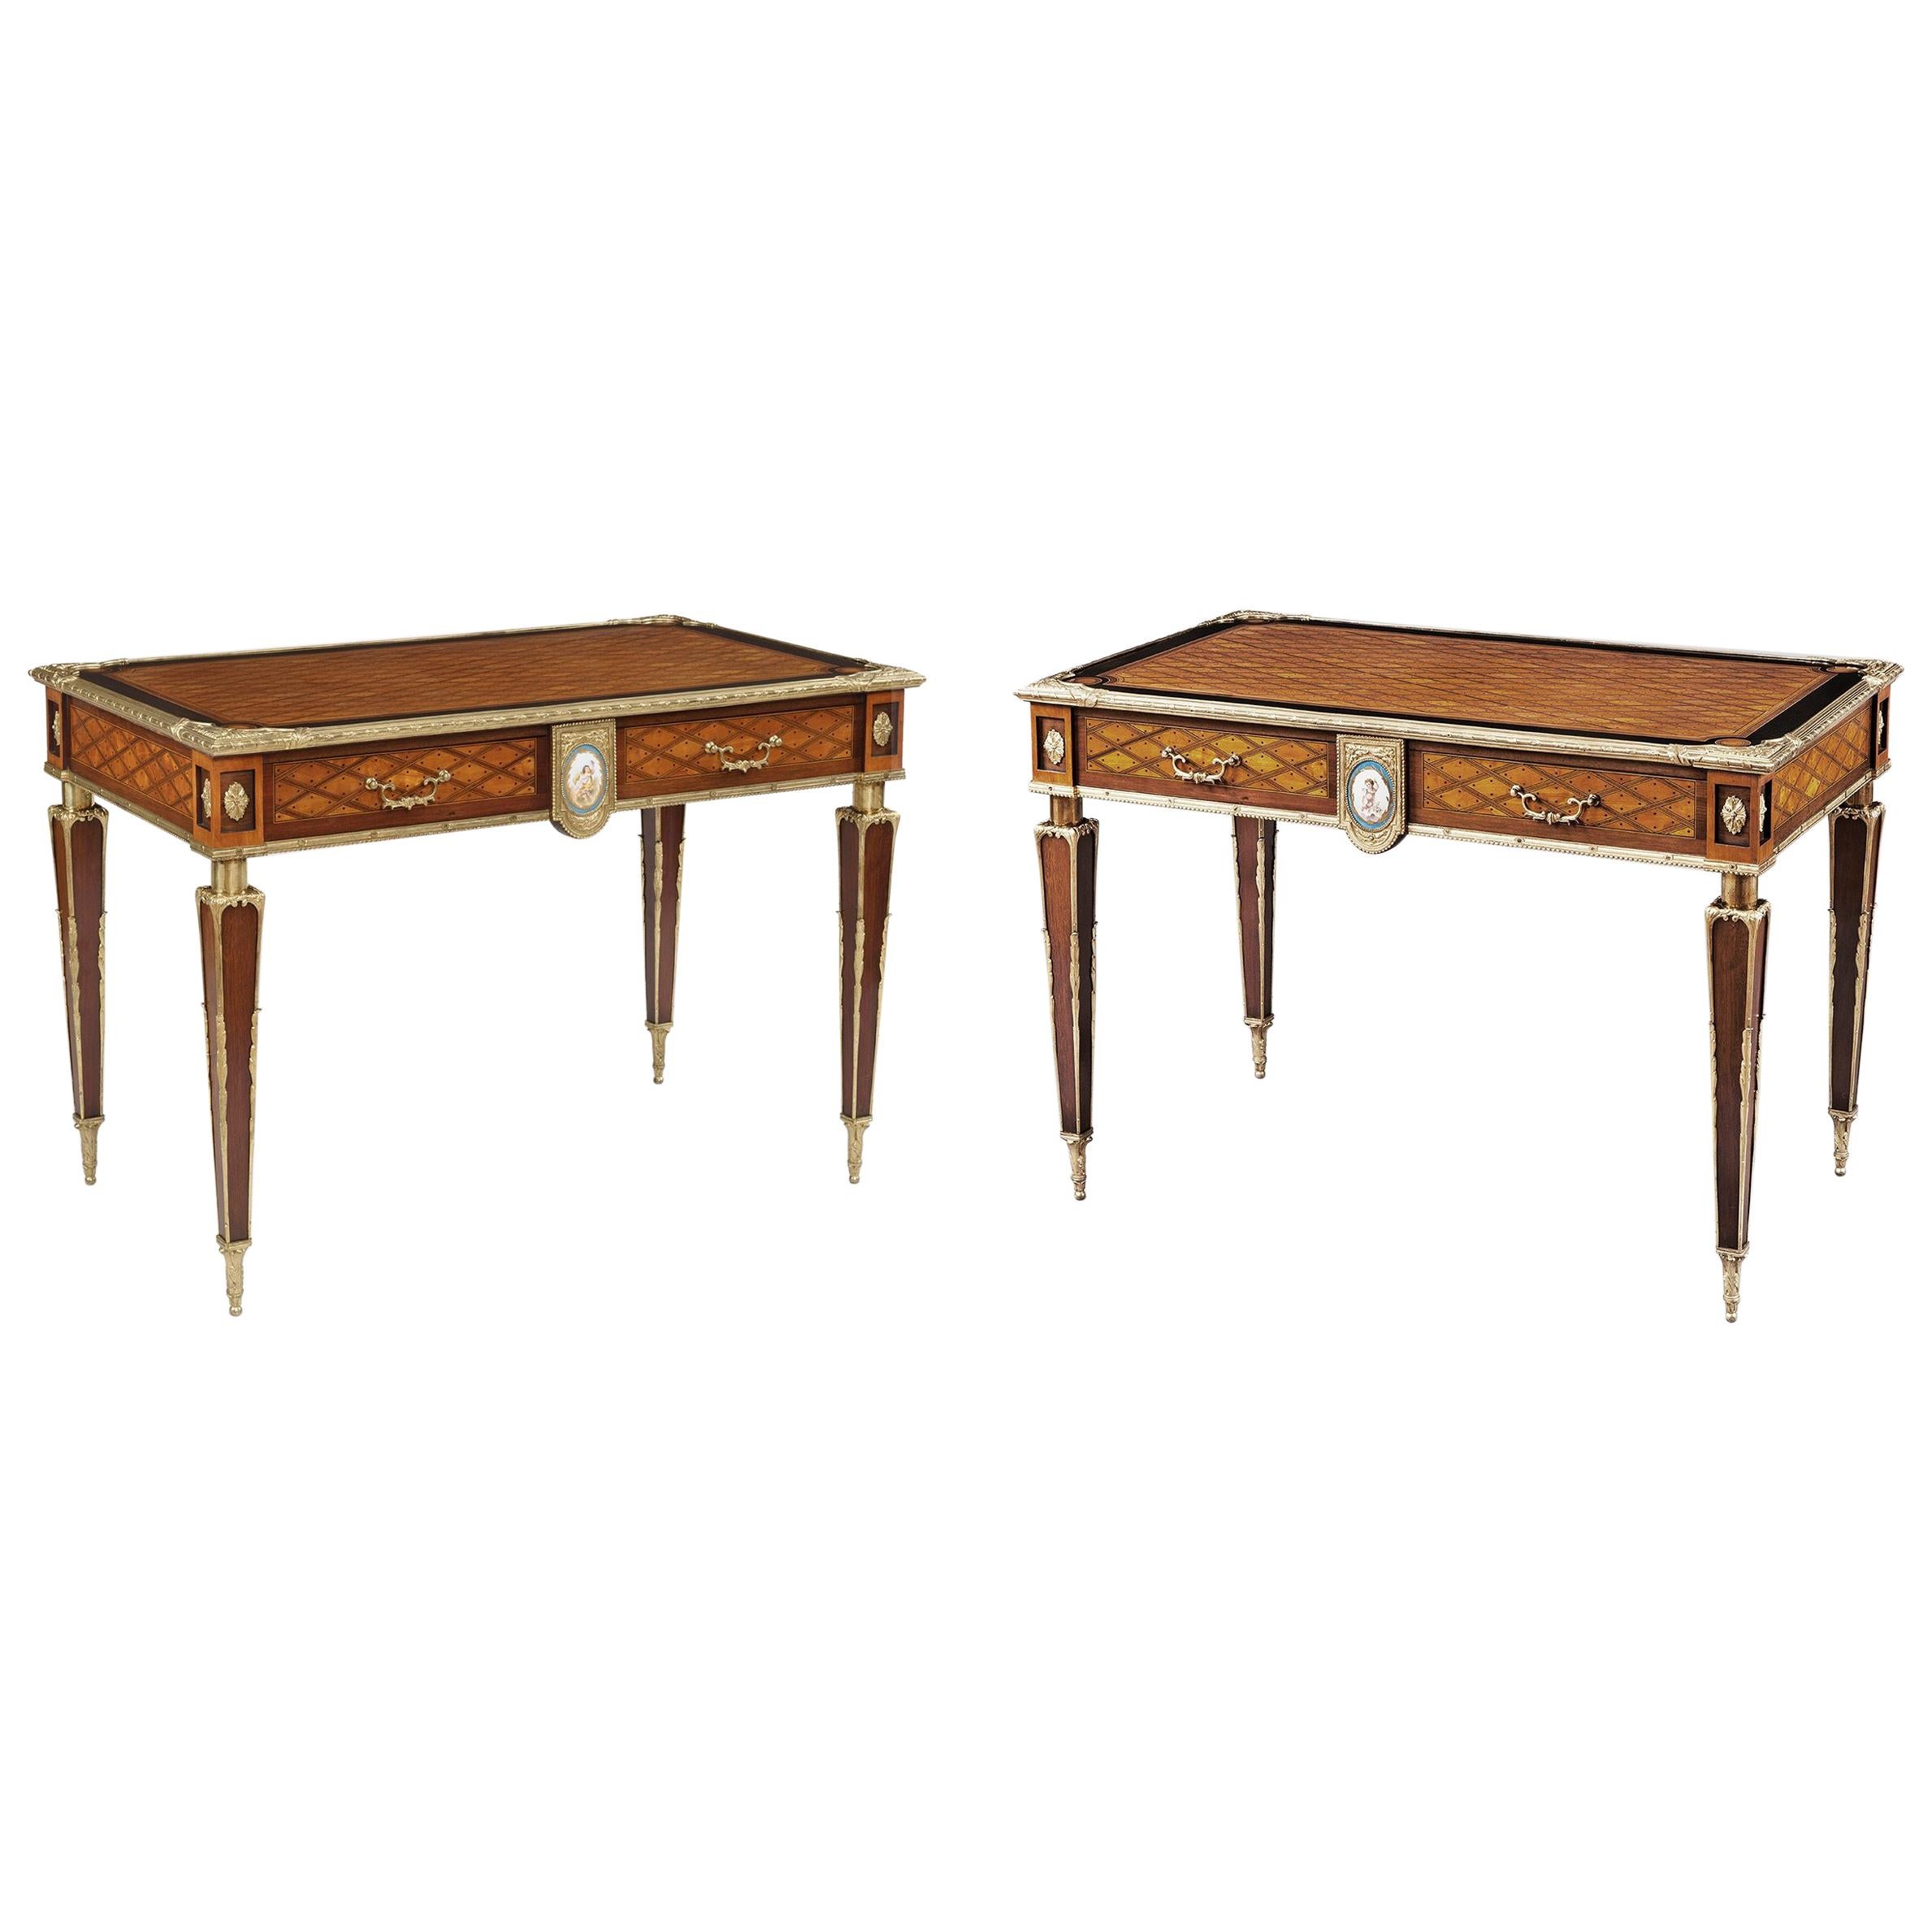 Pair of 19th Century Trellis and Dot Tables Attributed to Donald Ross